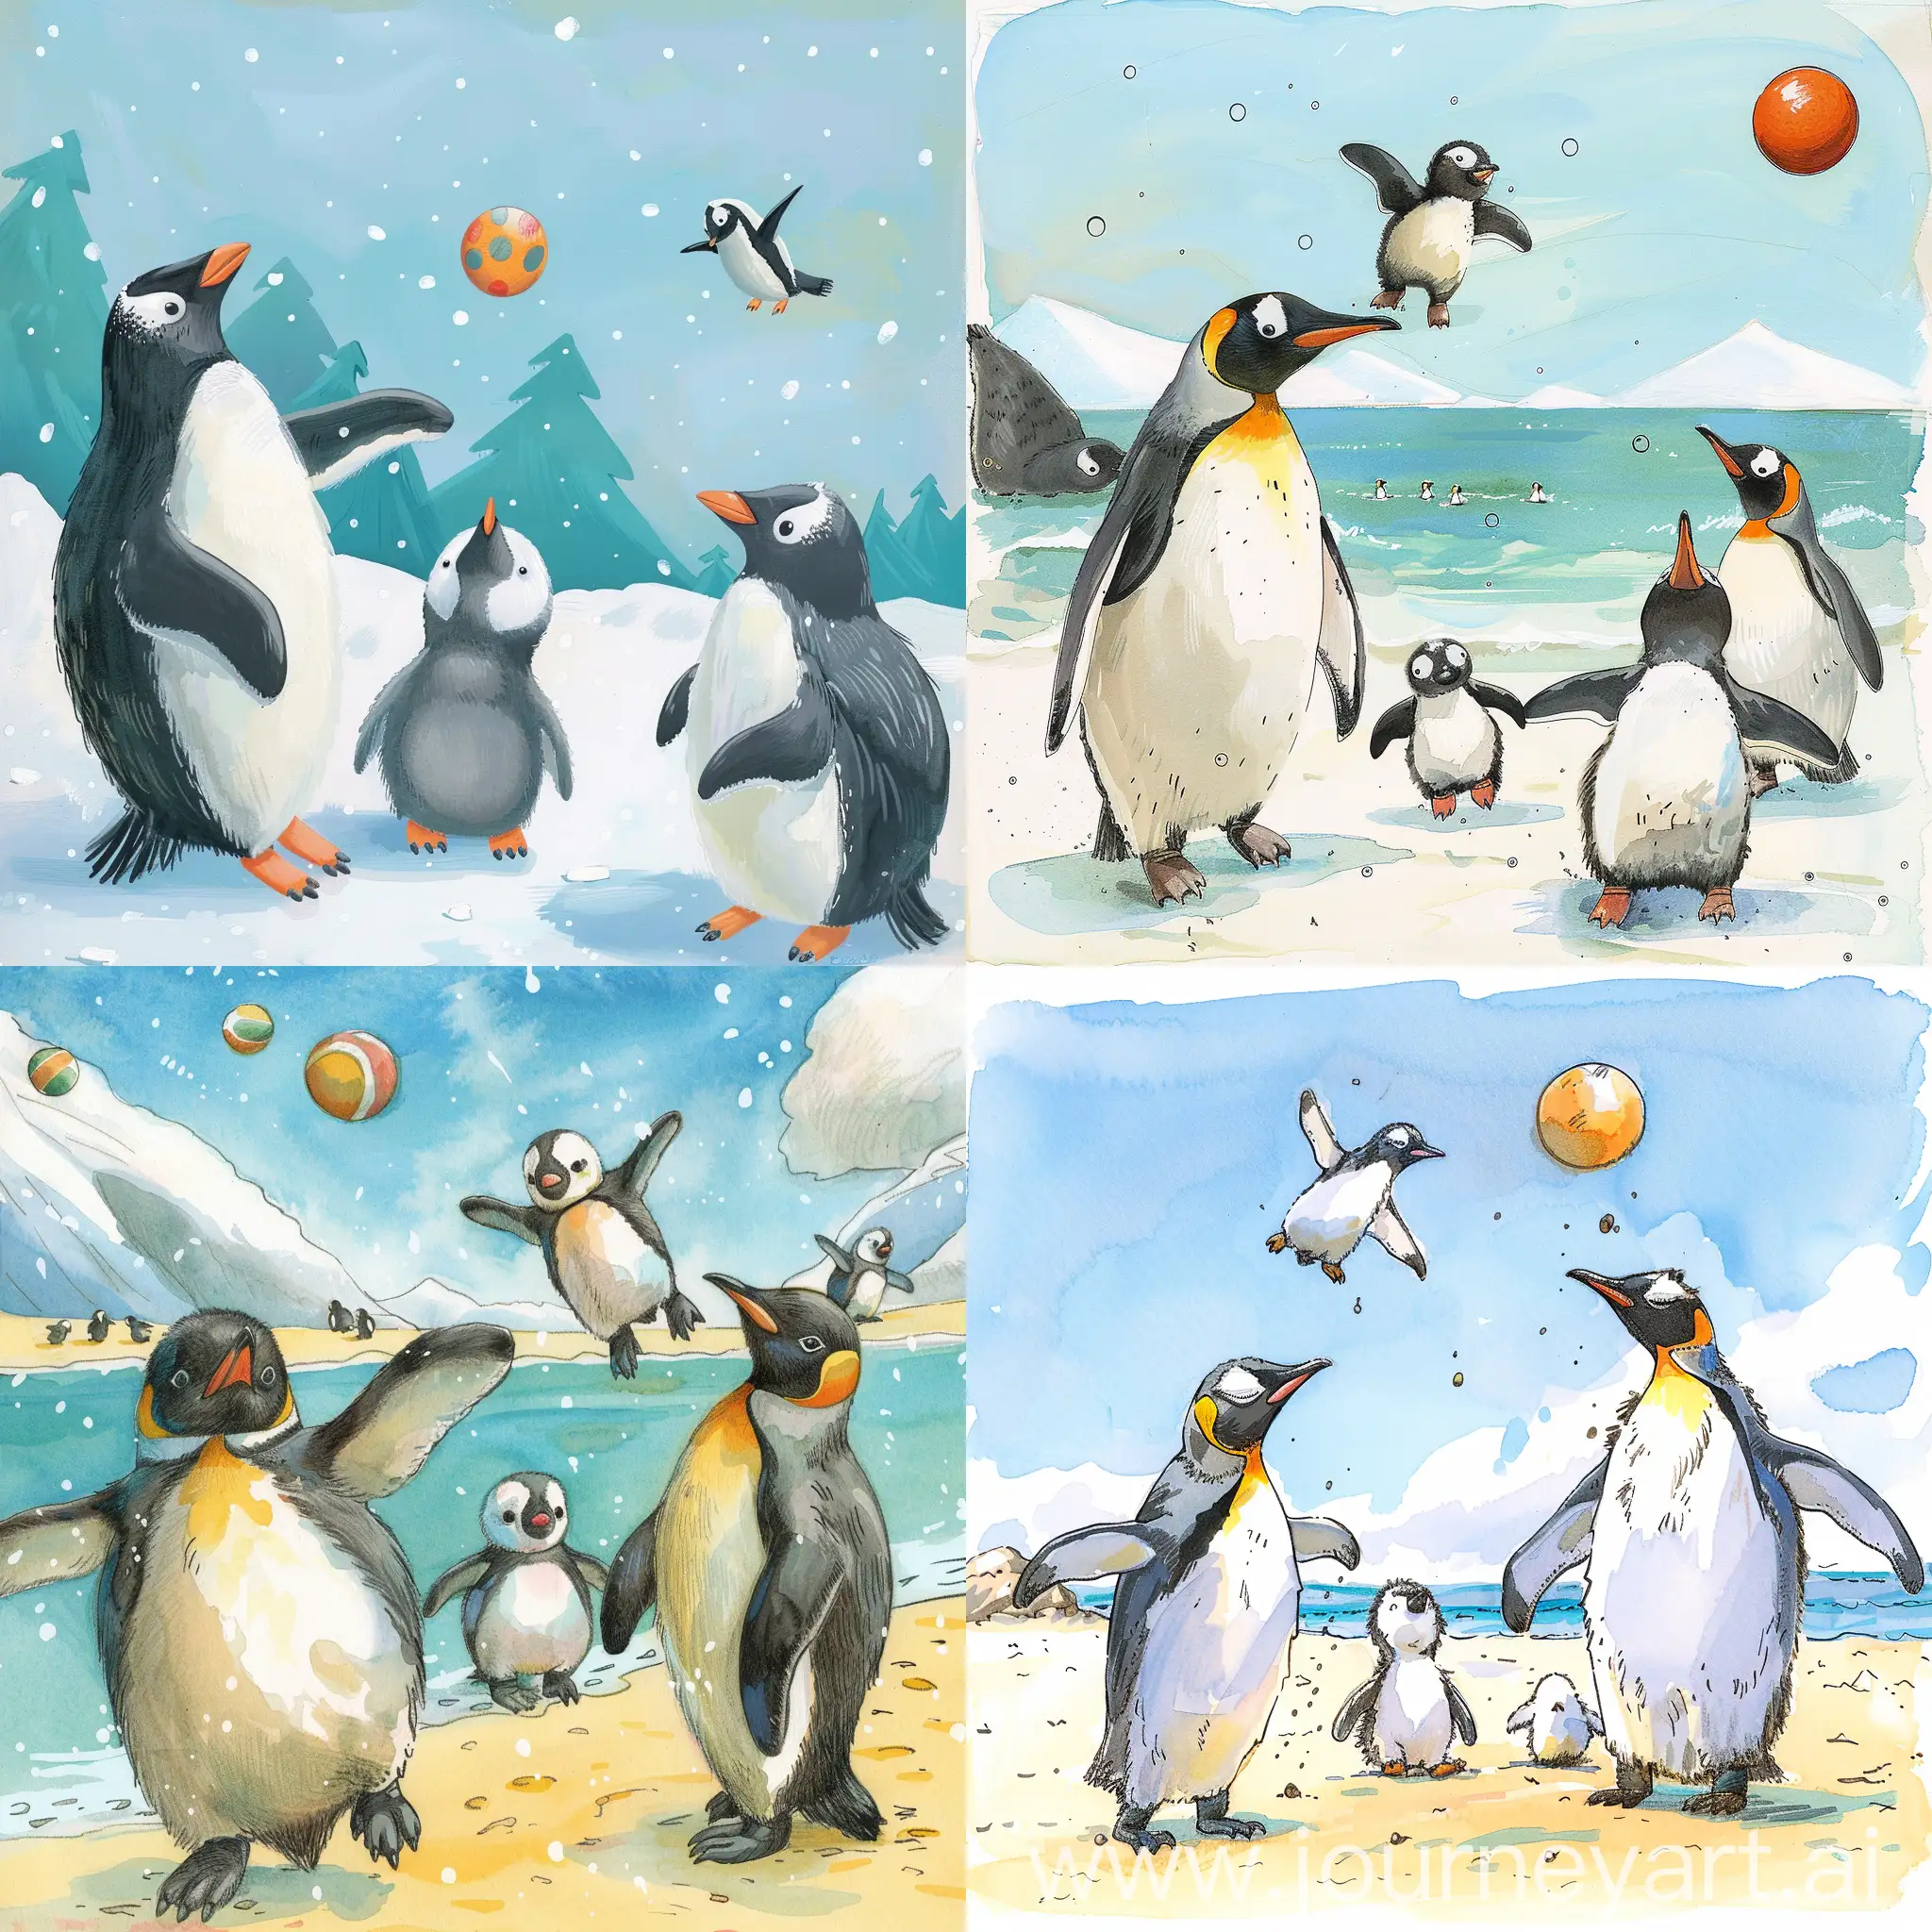 Penguin plays with his parents and wanders off to play ball with other penguin chicks.Storybook illustration